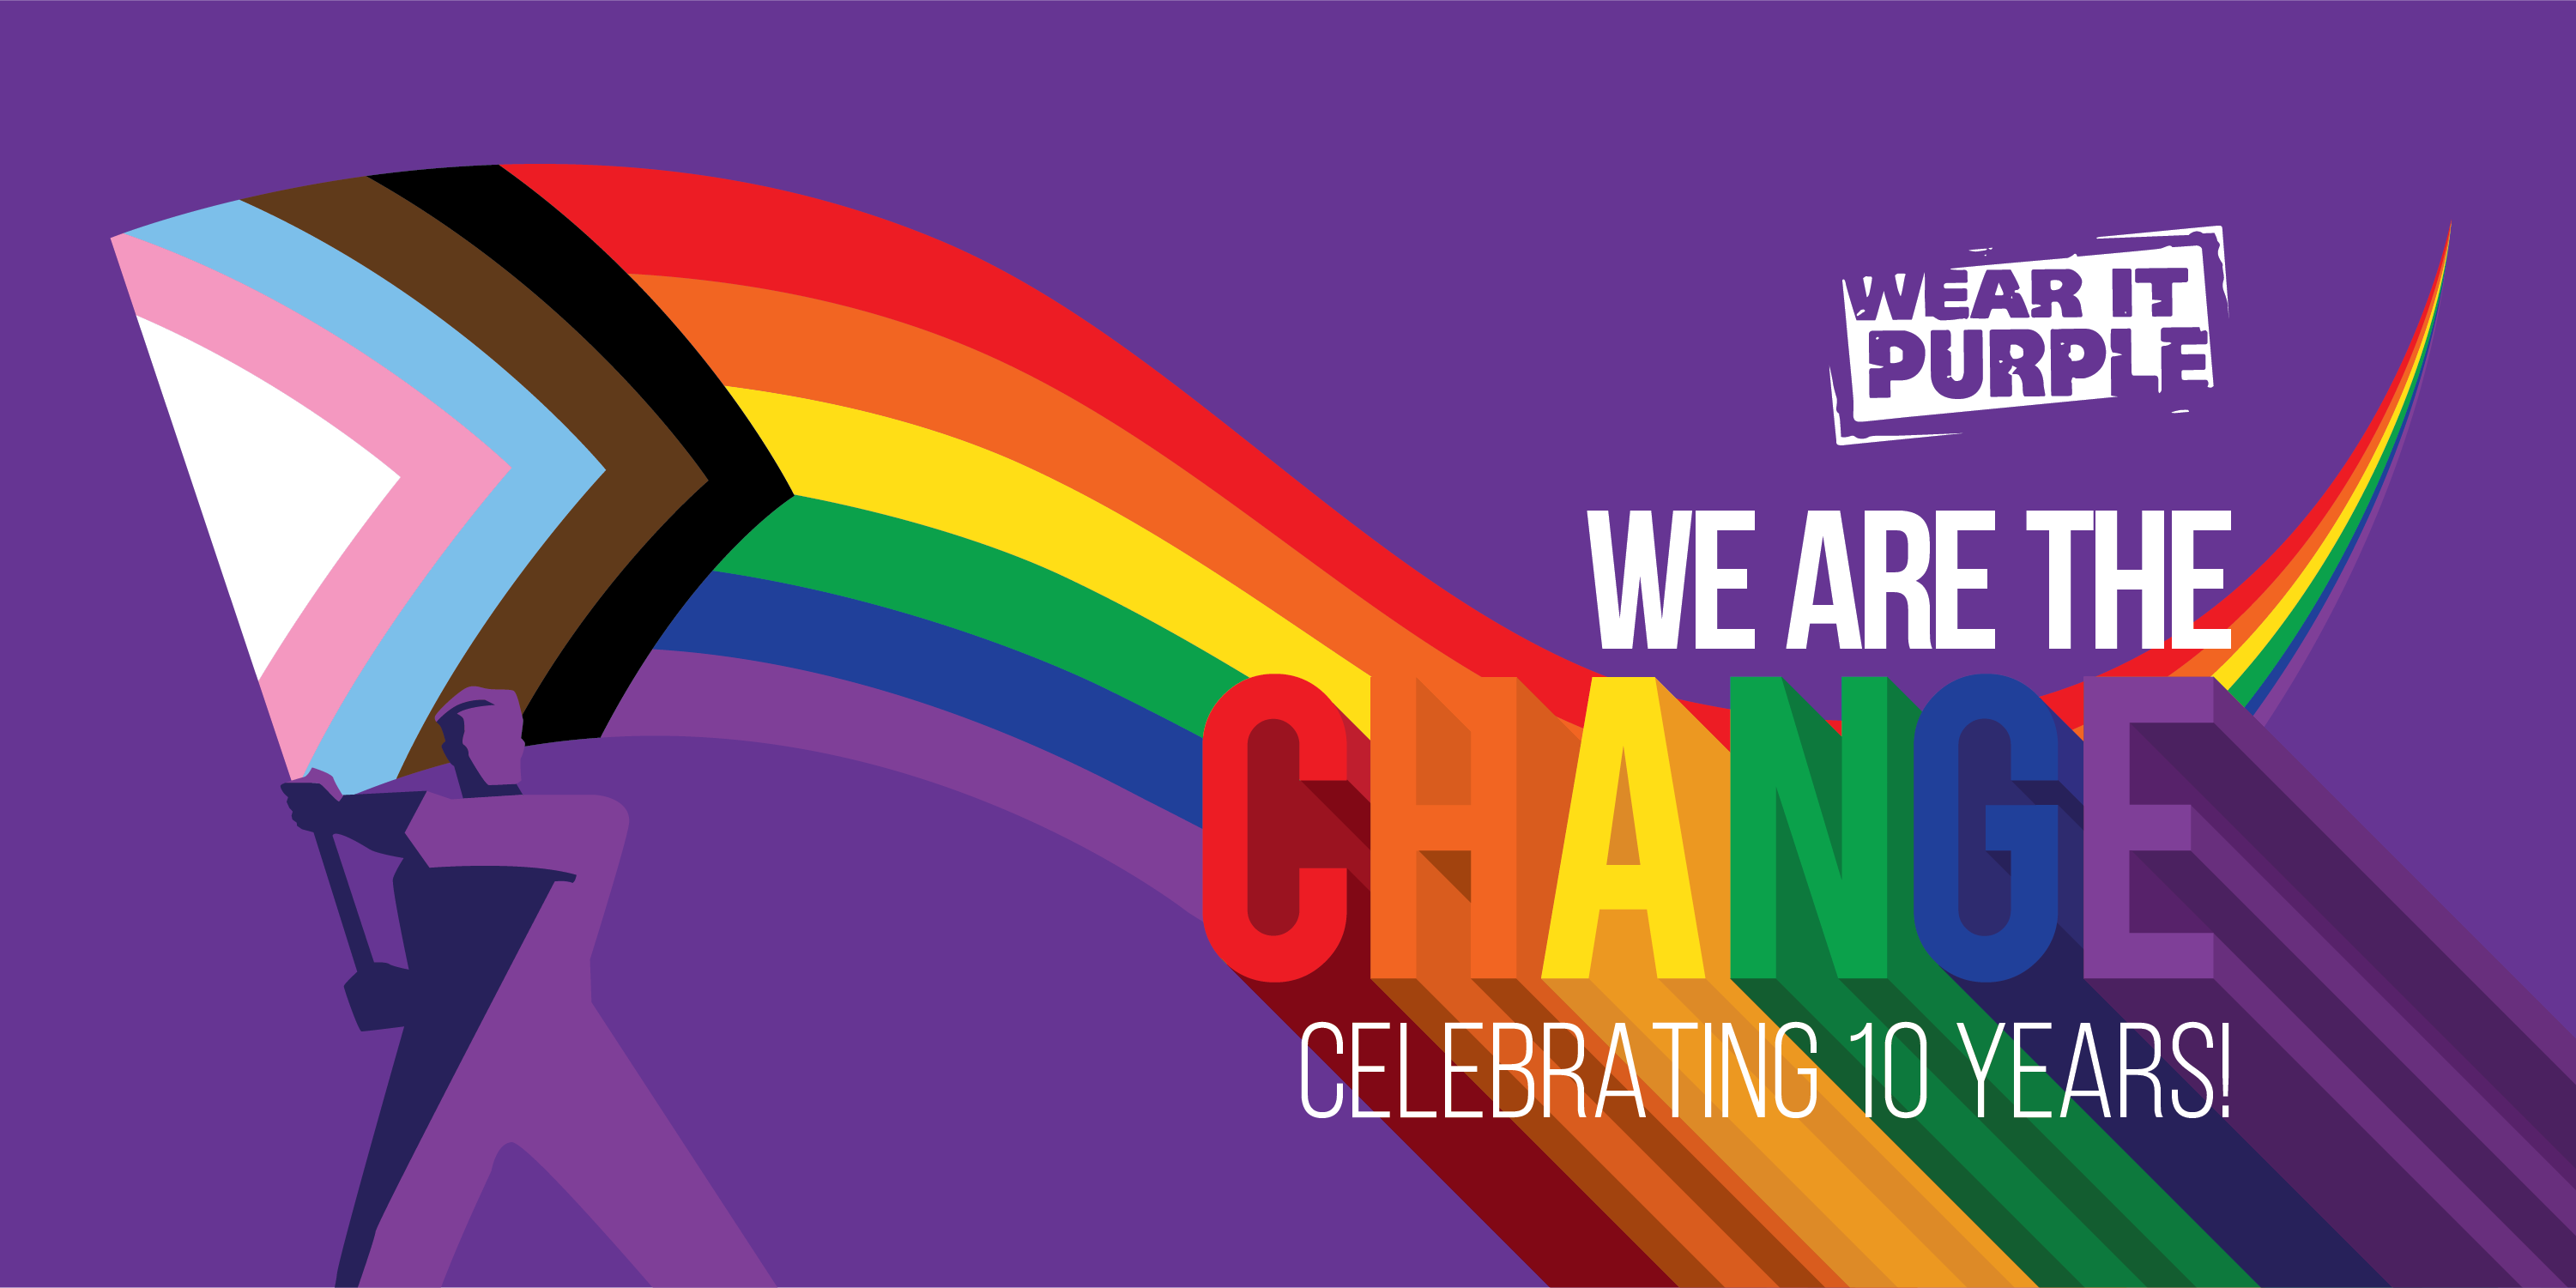 Foyer Foundation Supports LGBTIQ+ Youth By Wearing It Purple The